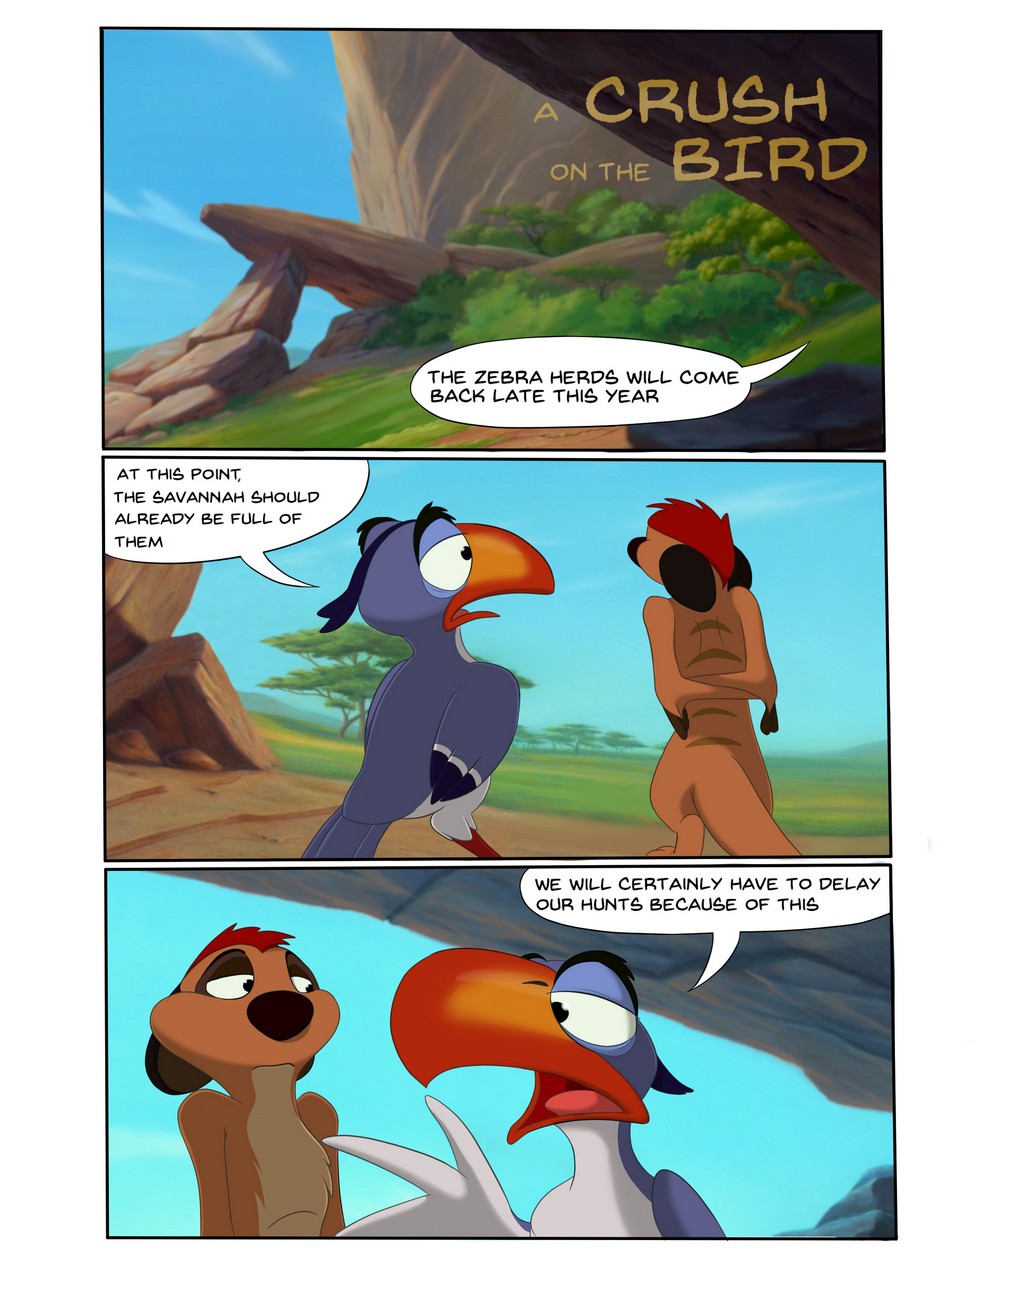 A Crush On The Bird - MyHentaiGallery Free Porn Comics and Sex Cartoons